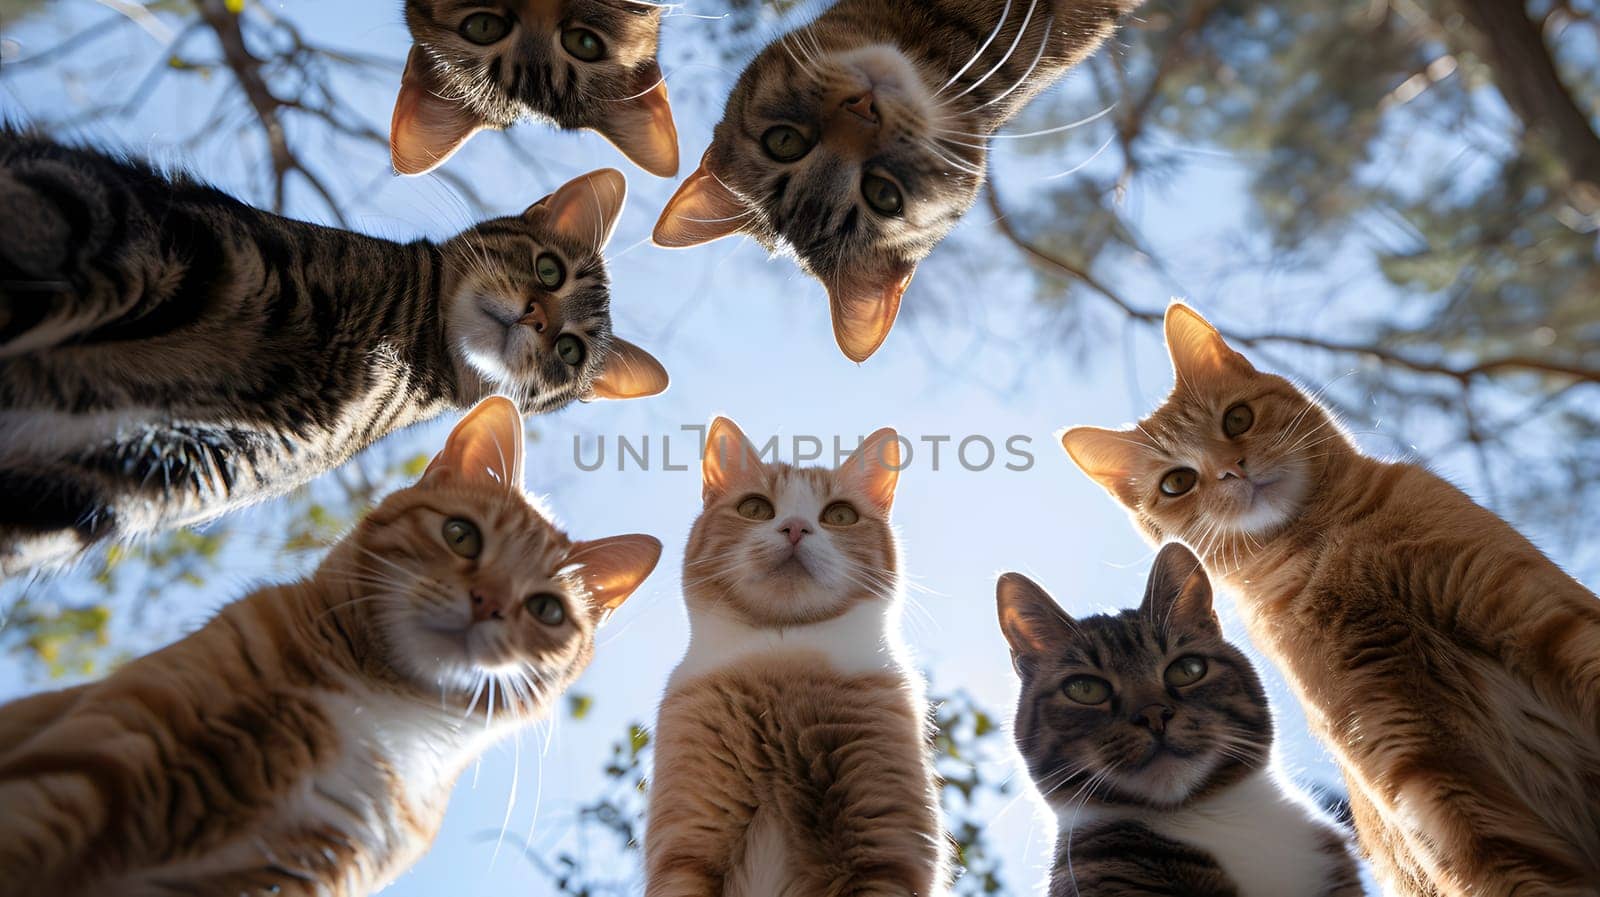 A group of small to mediumsized cats, members of the Felidae family, are standing in a circle, gazing up at the sky with their whiskers and fur on display